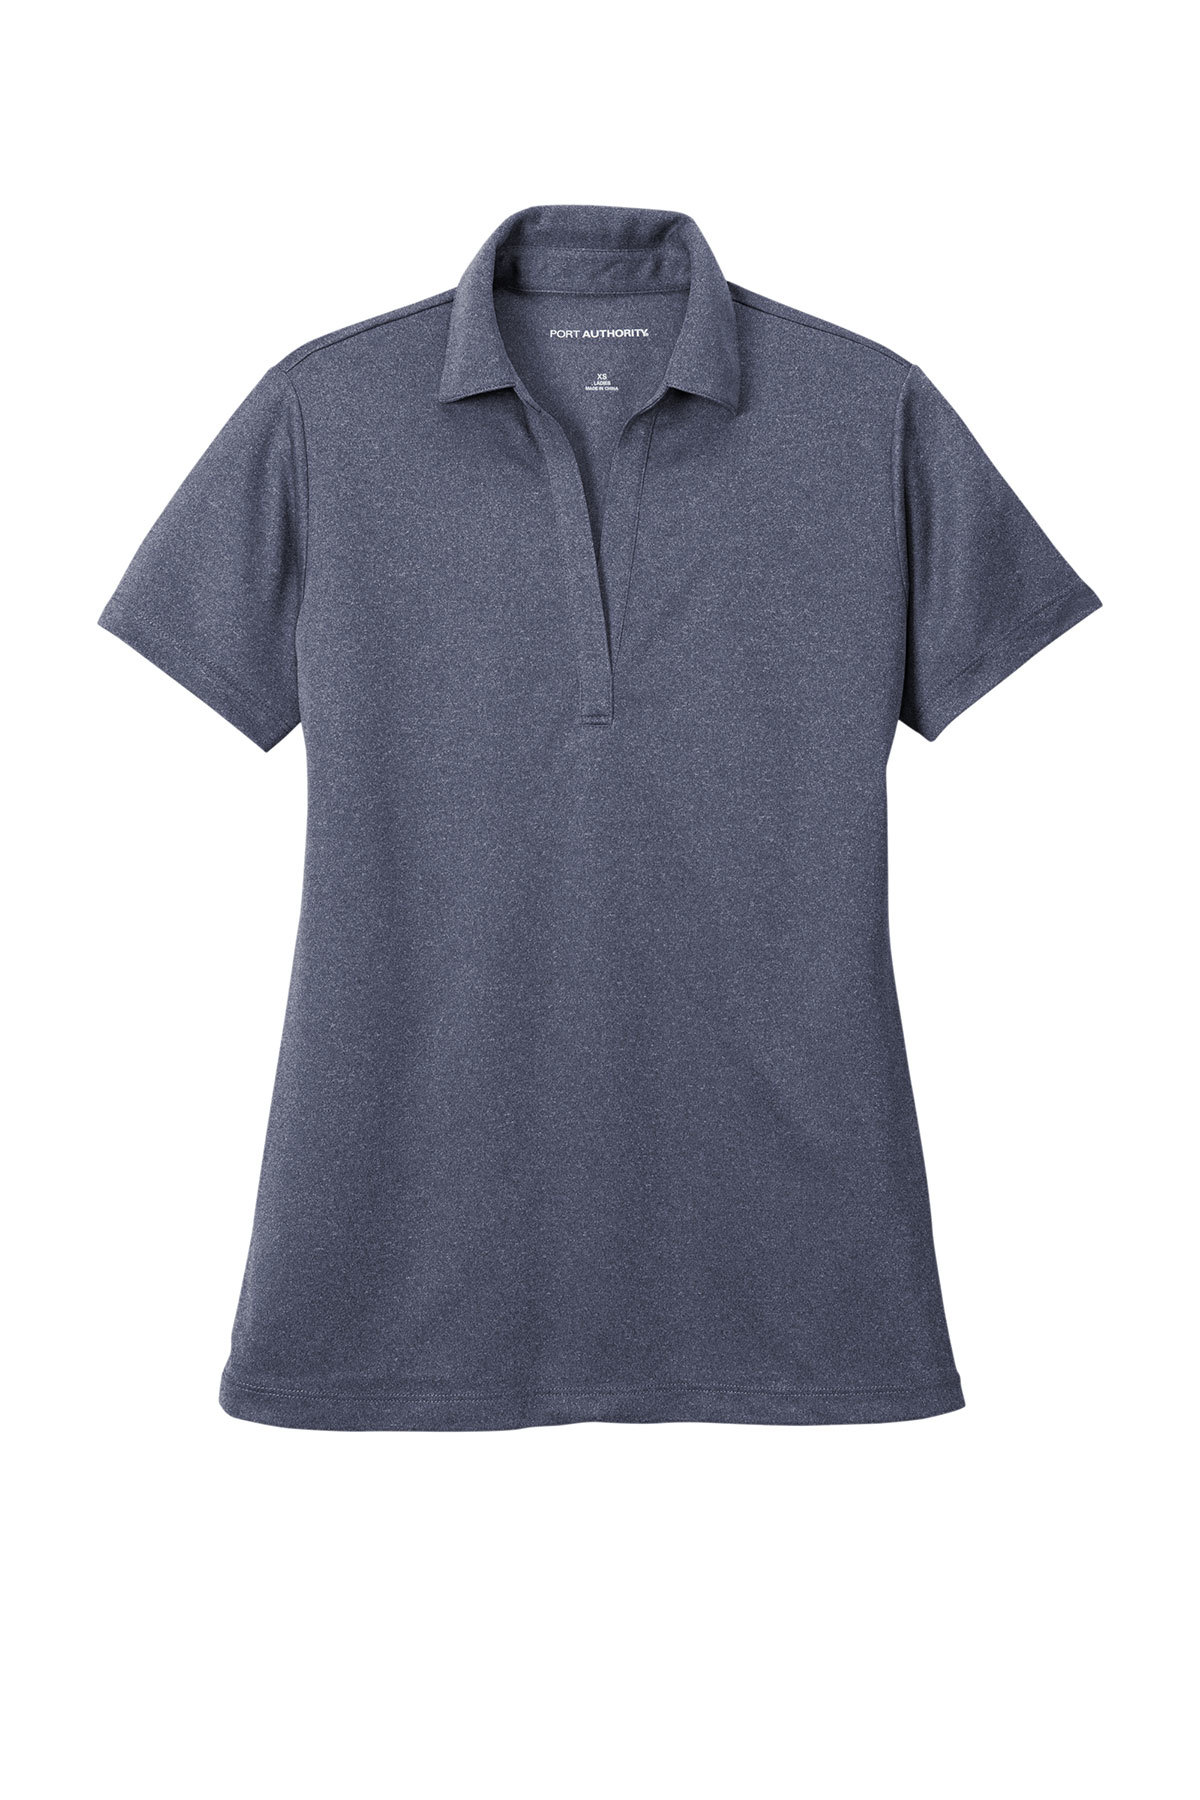 Port Authority Ladies Heathered Silk Touch Performance Polo | Product |  Port Authority | Poloshirts